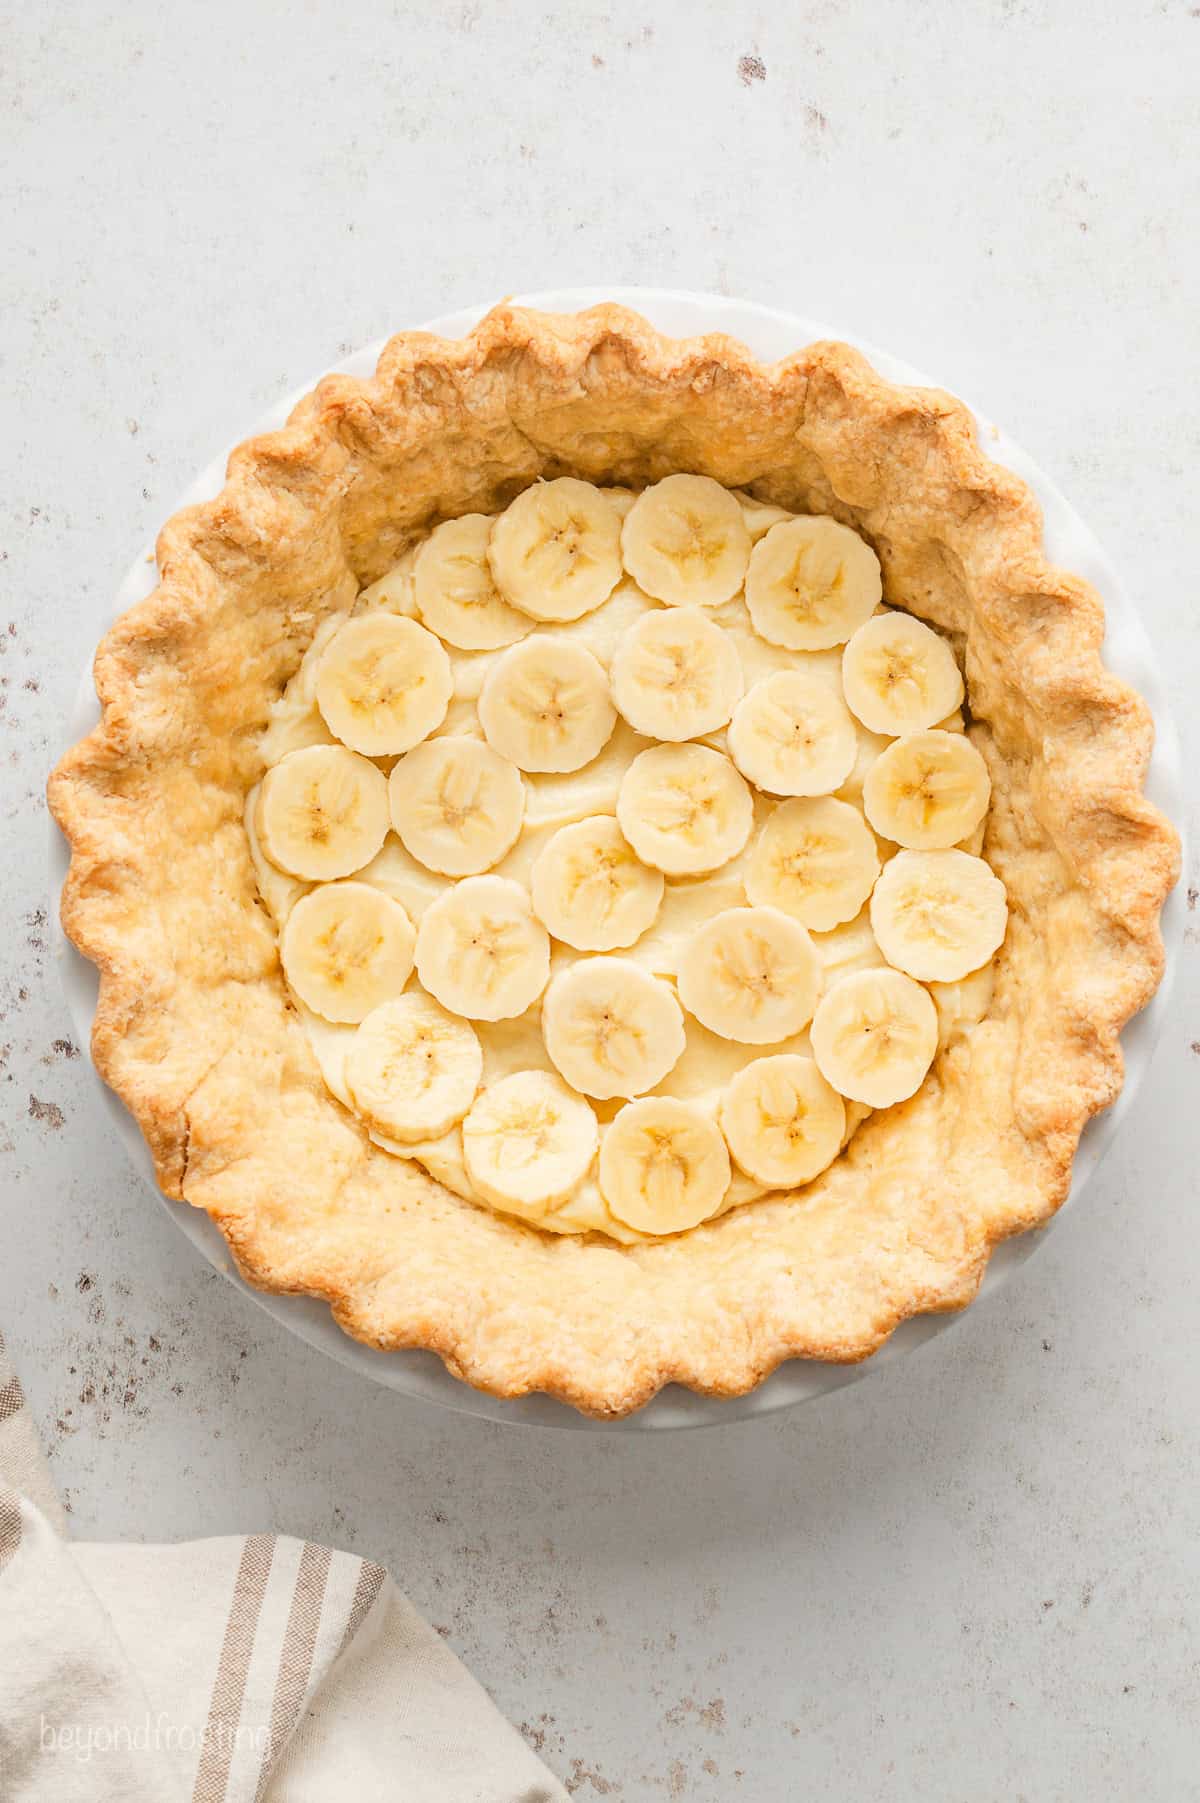 Banana slices layered over the pudding base inside a pie crust.